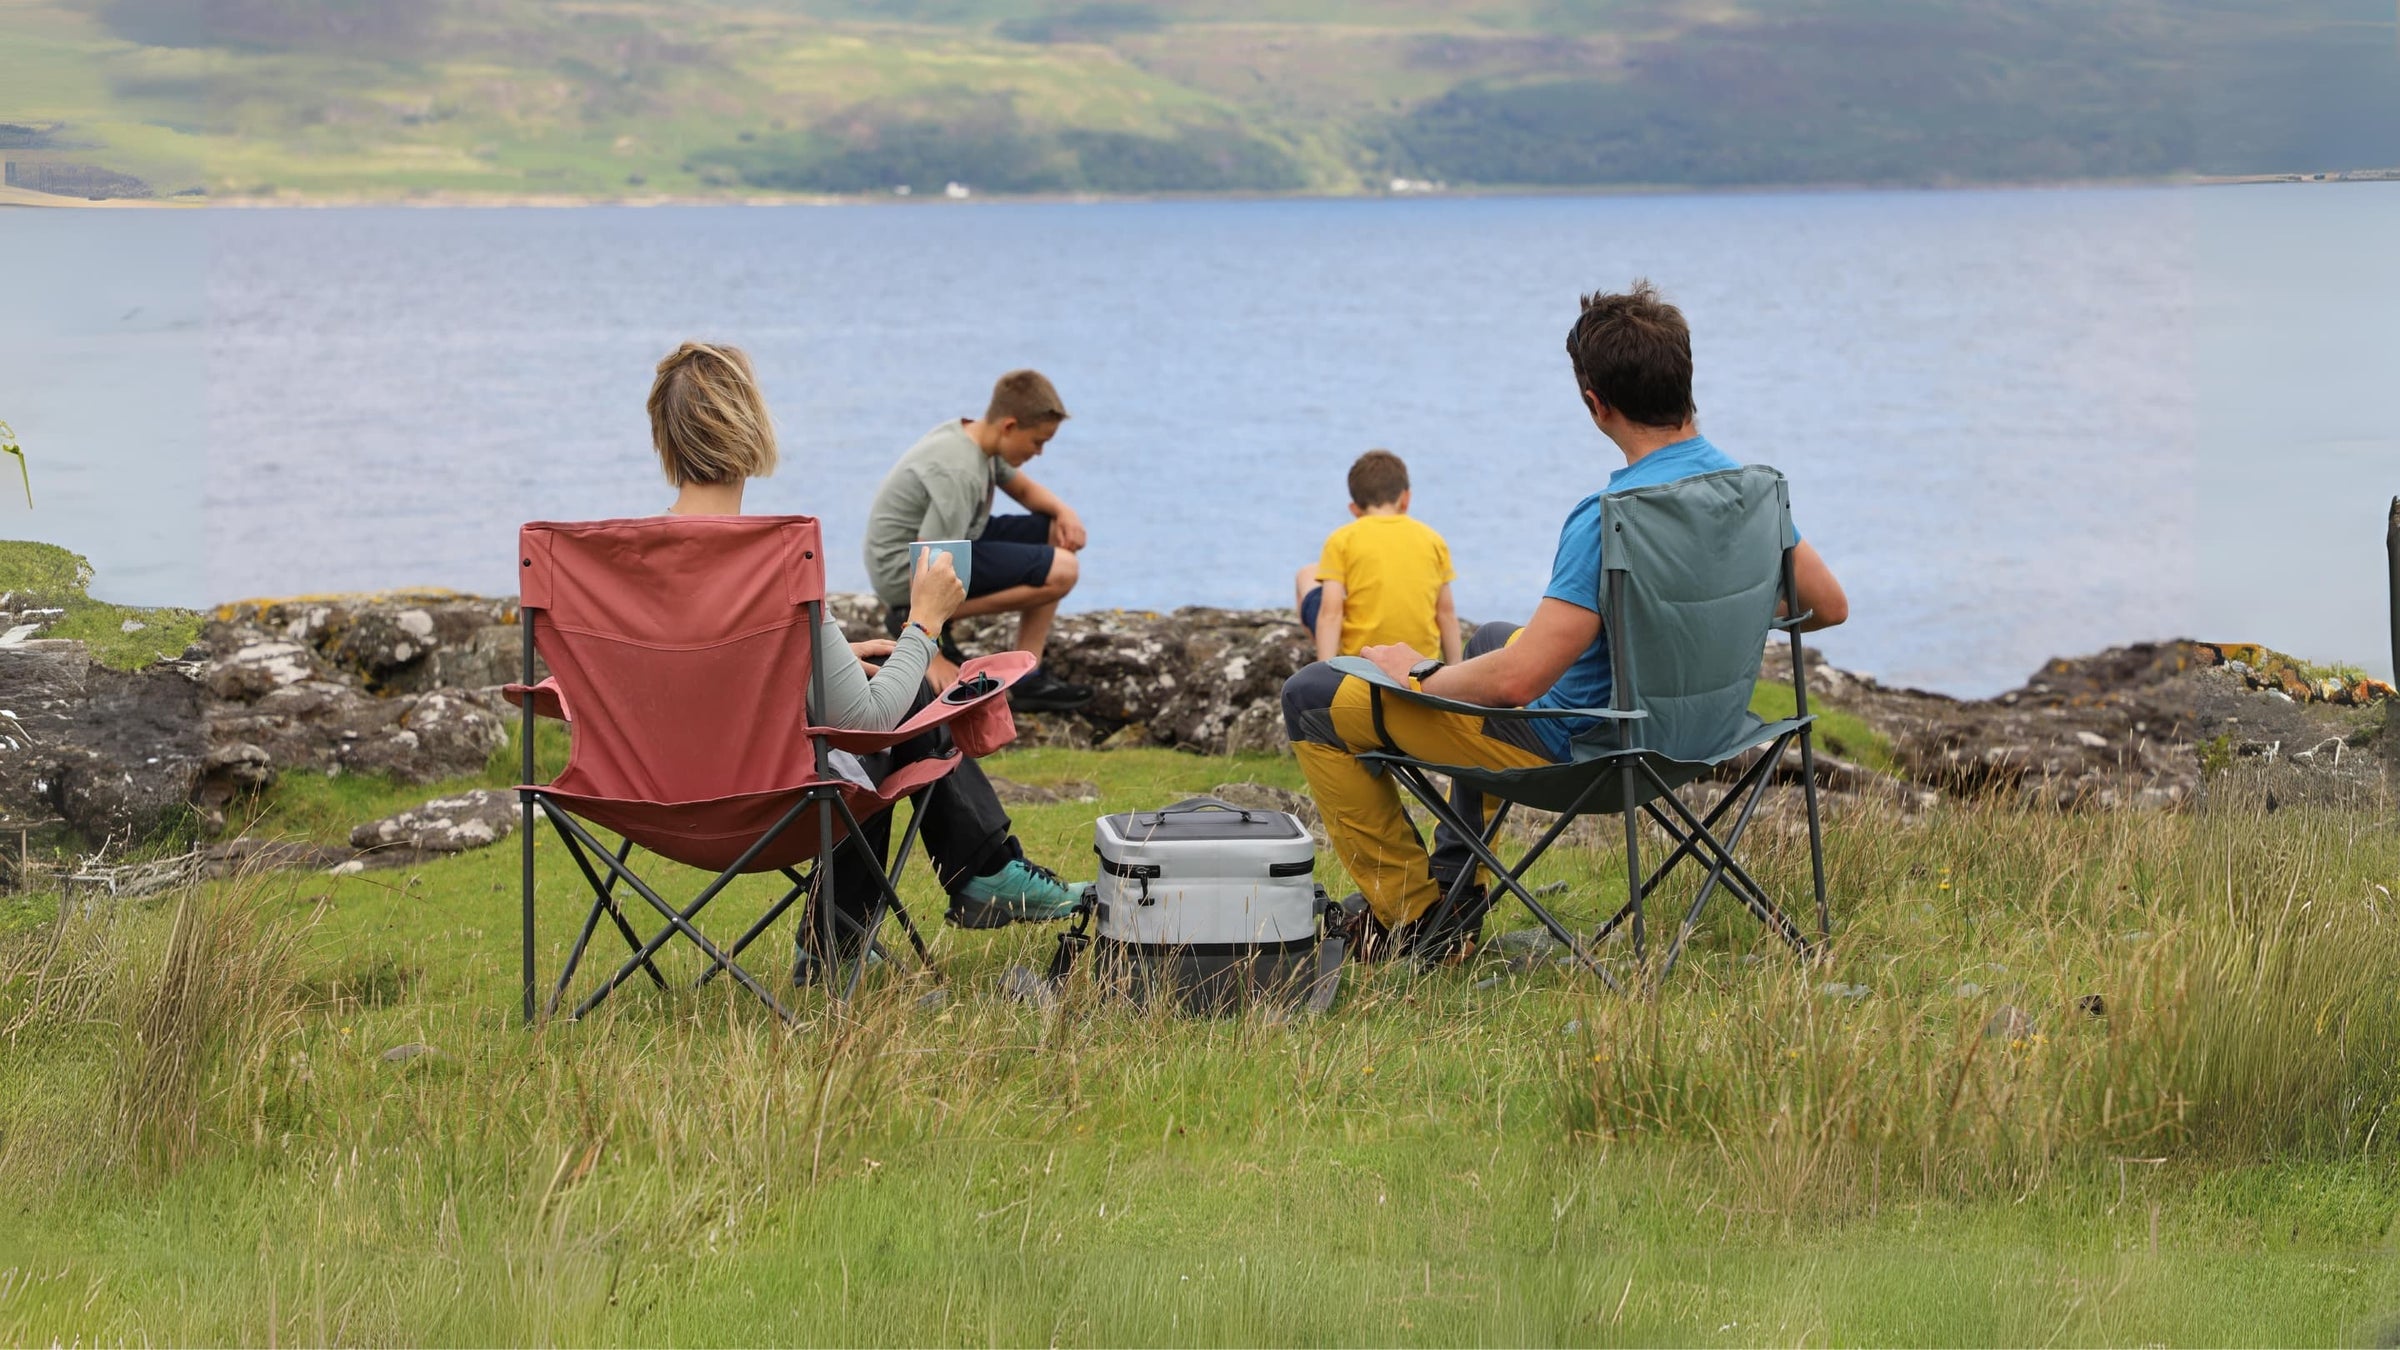 Camping Furniture - Chairs, Tables, Cupboards & Storage Units and Camping Kitchens & Cooker Stands